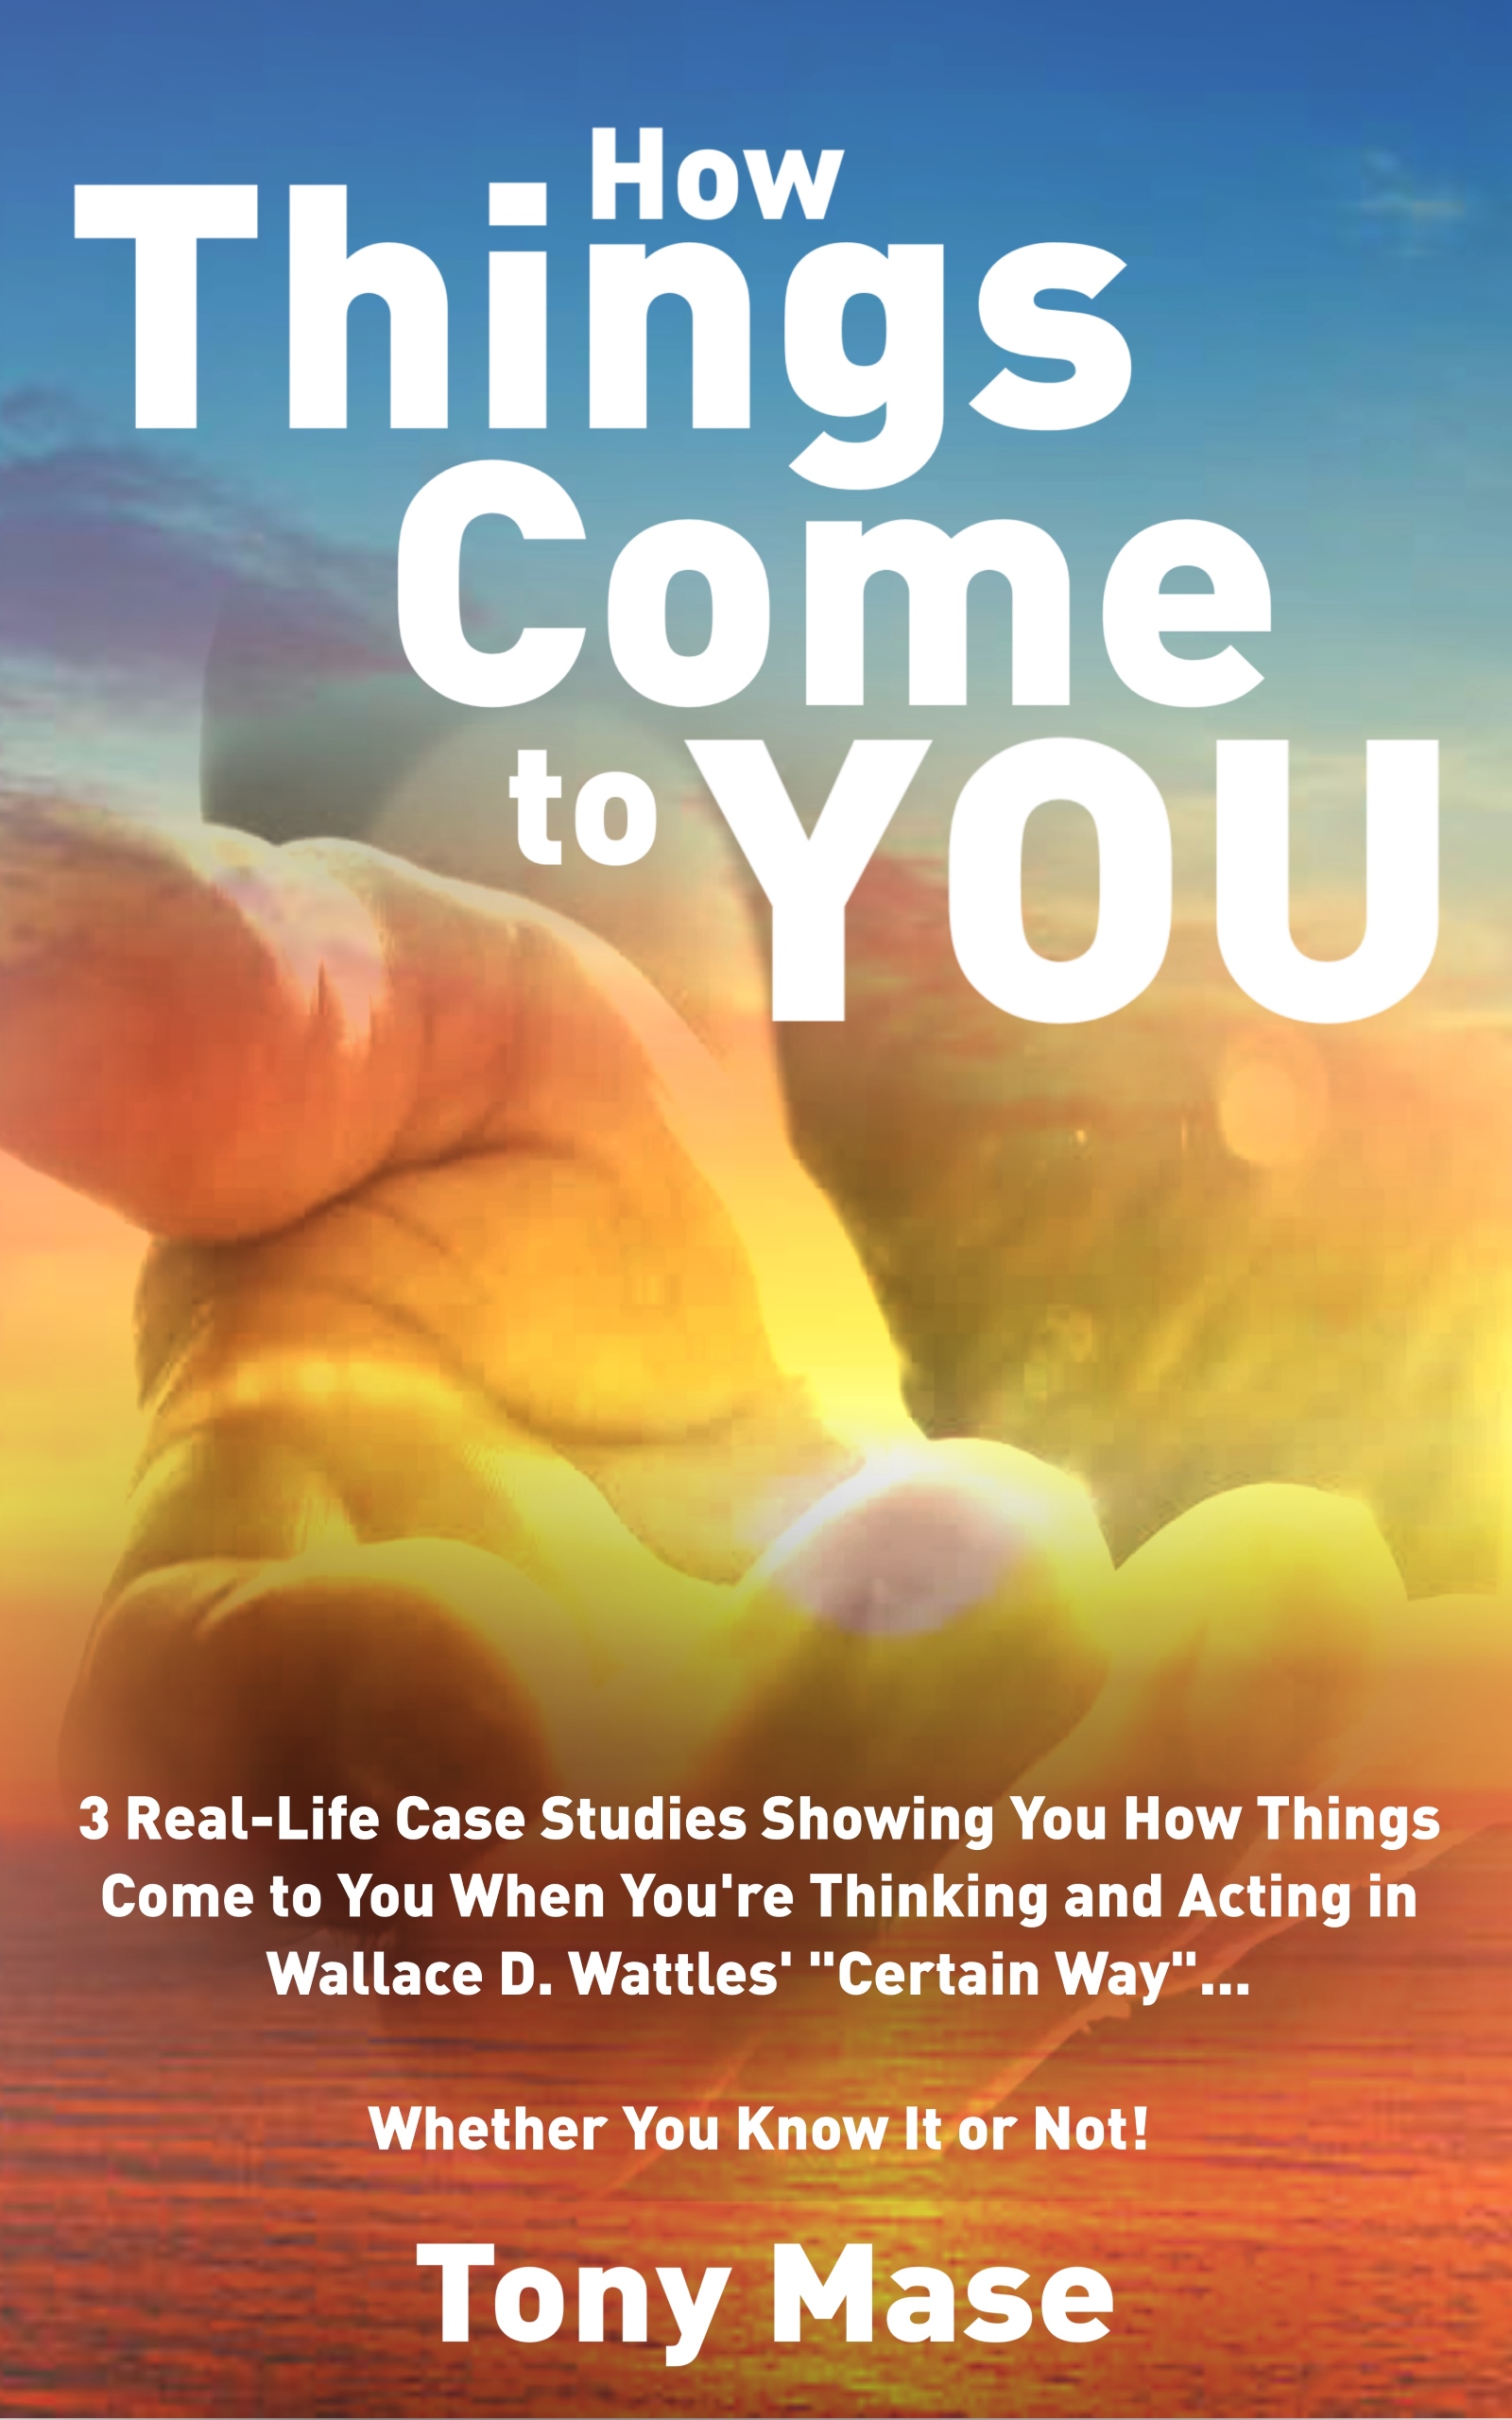 FREE: How Things Come to You by Tony Mase